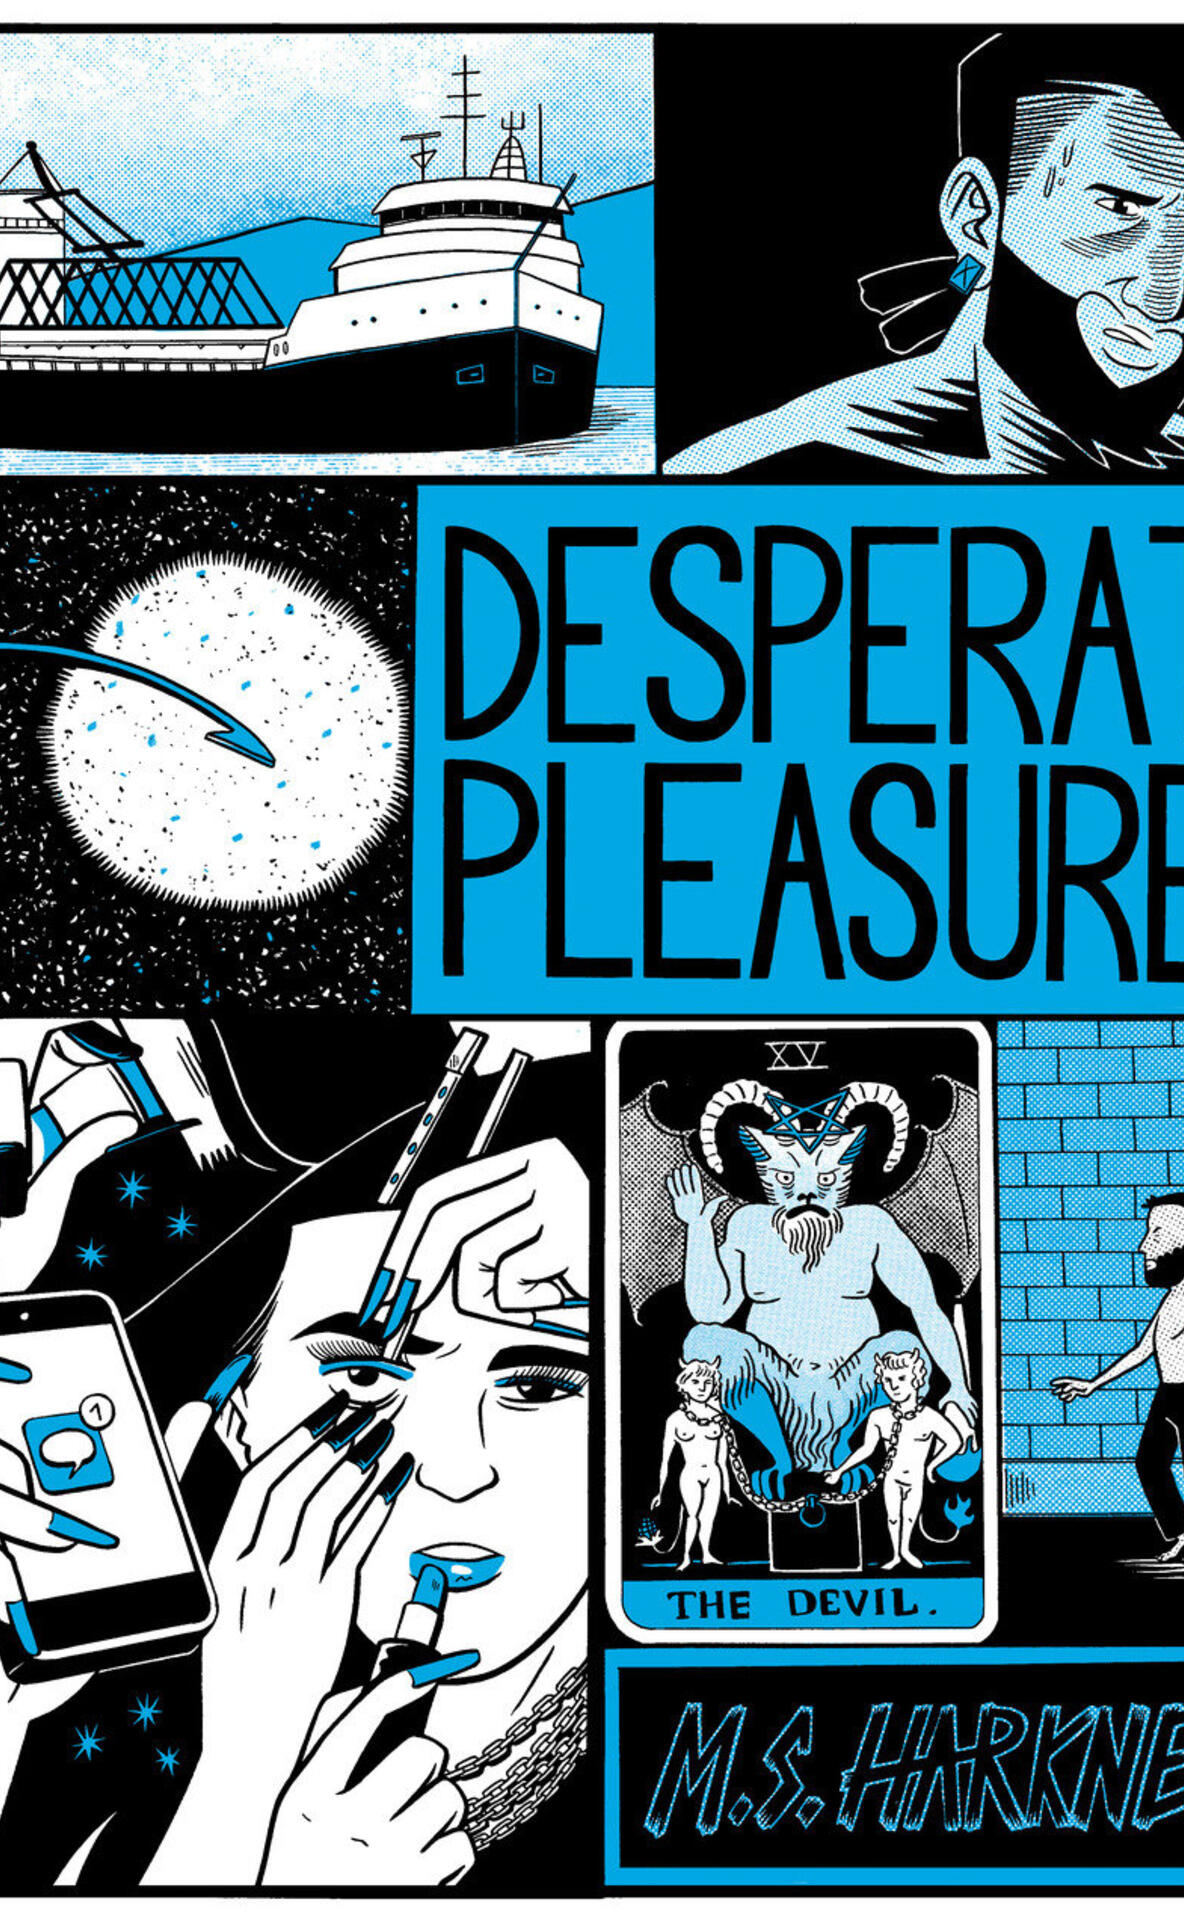 Desperate Pleasures Comic Page by M.S. Harkness ; M.S. Harkness